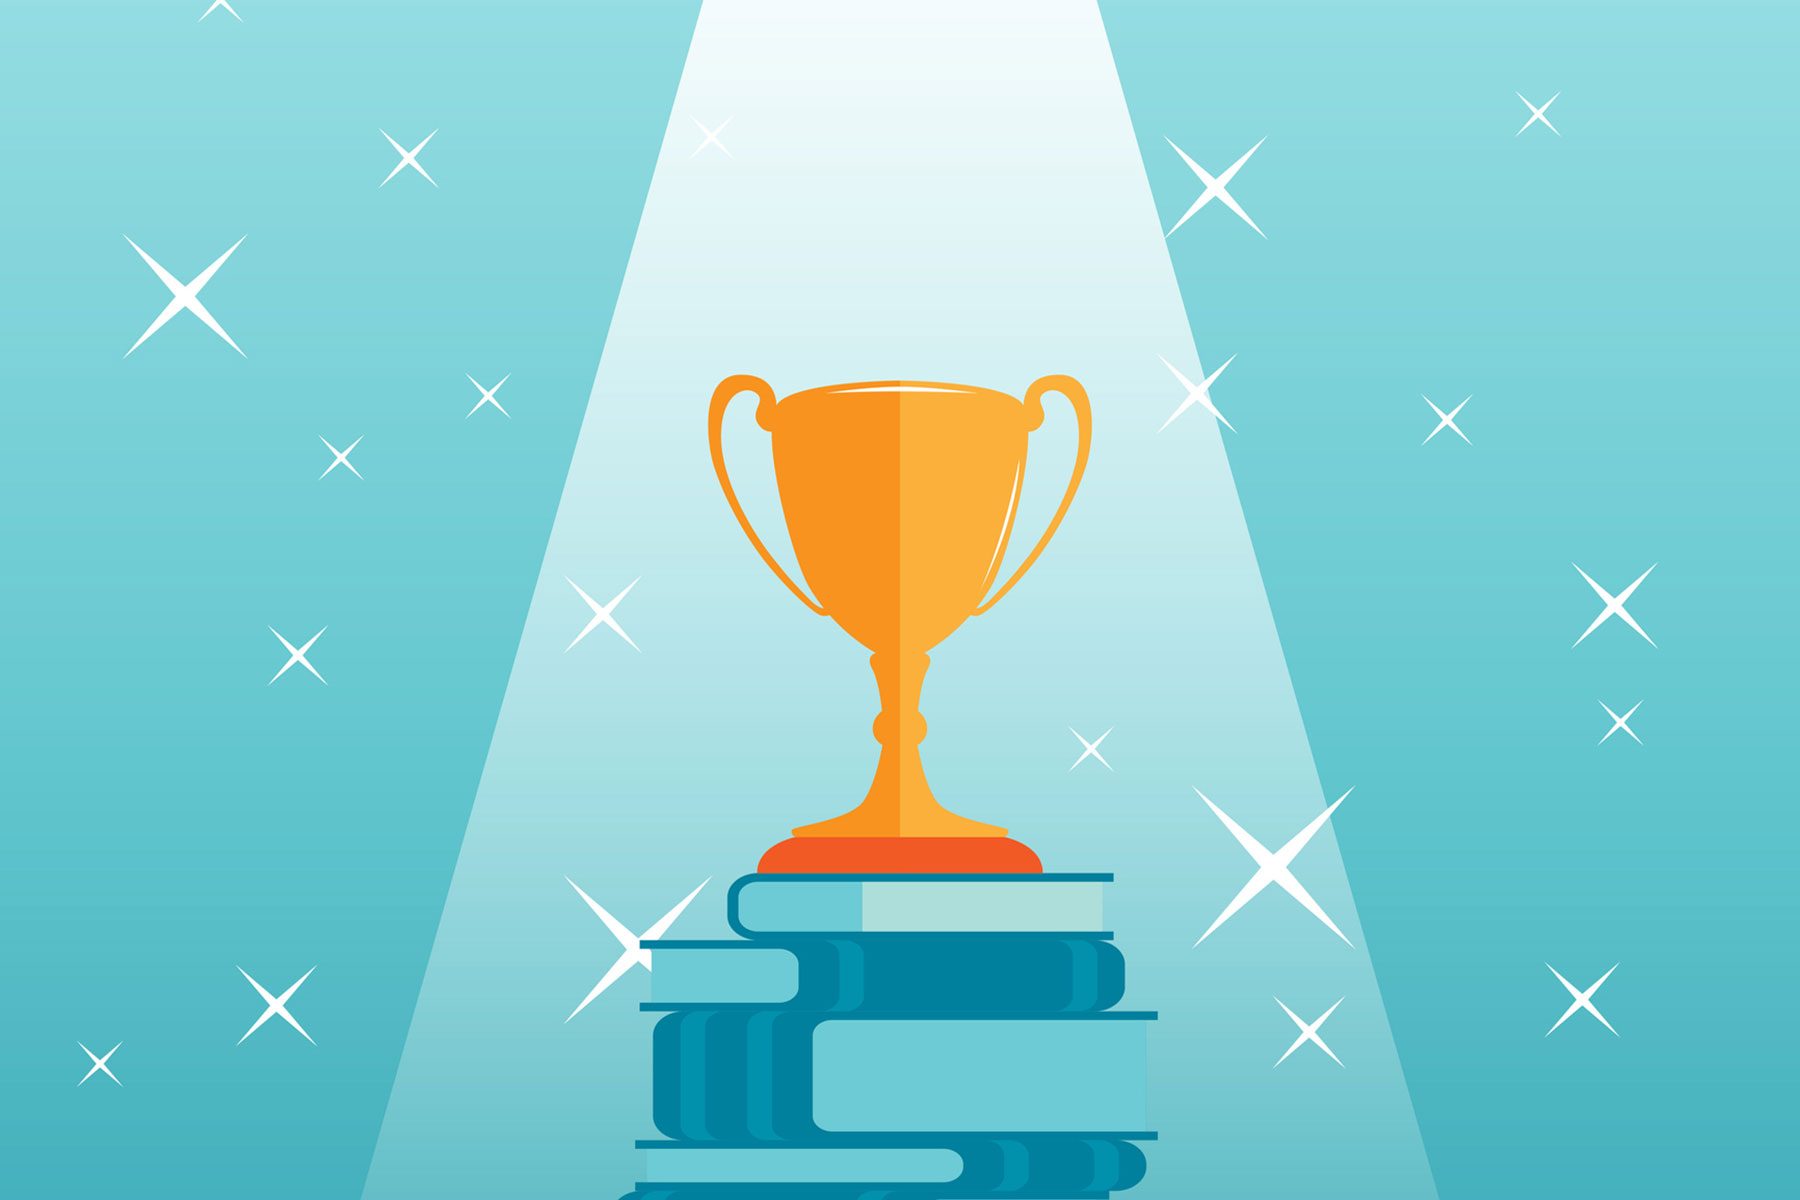 illustration of a golden trophy on top of a stack of books